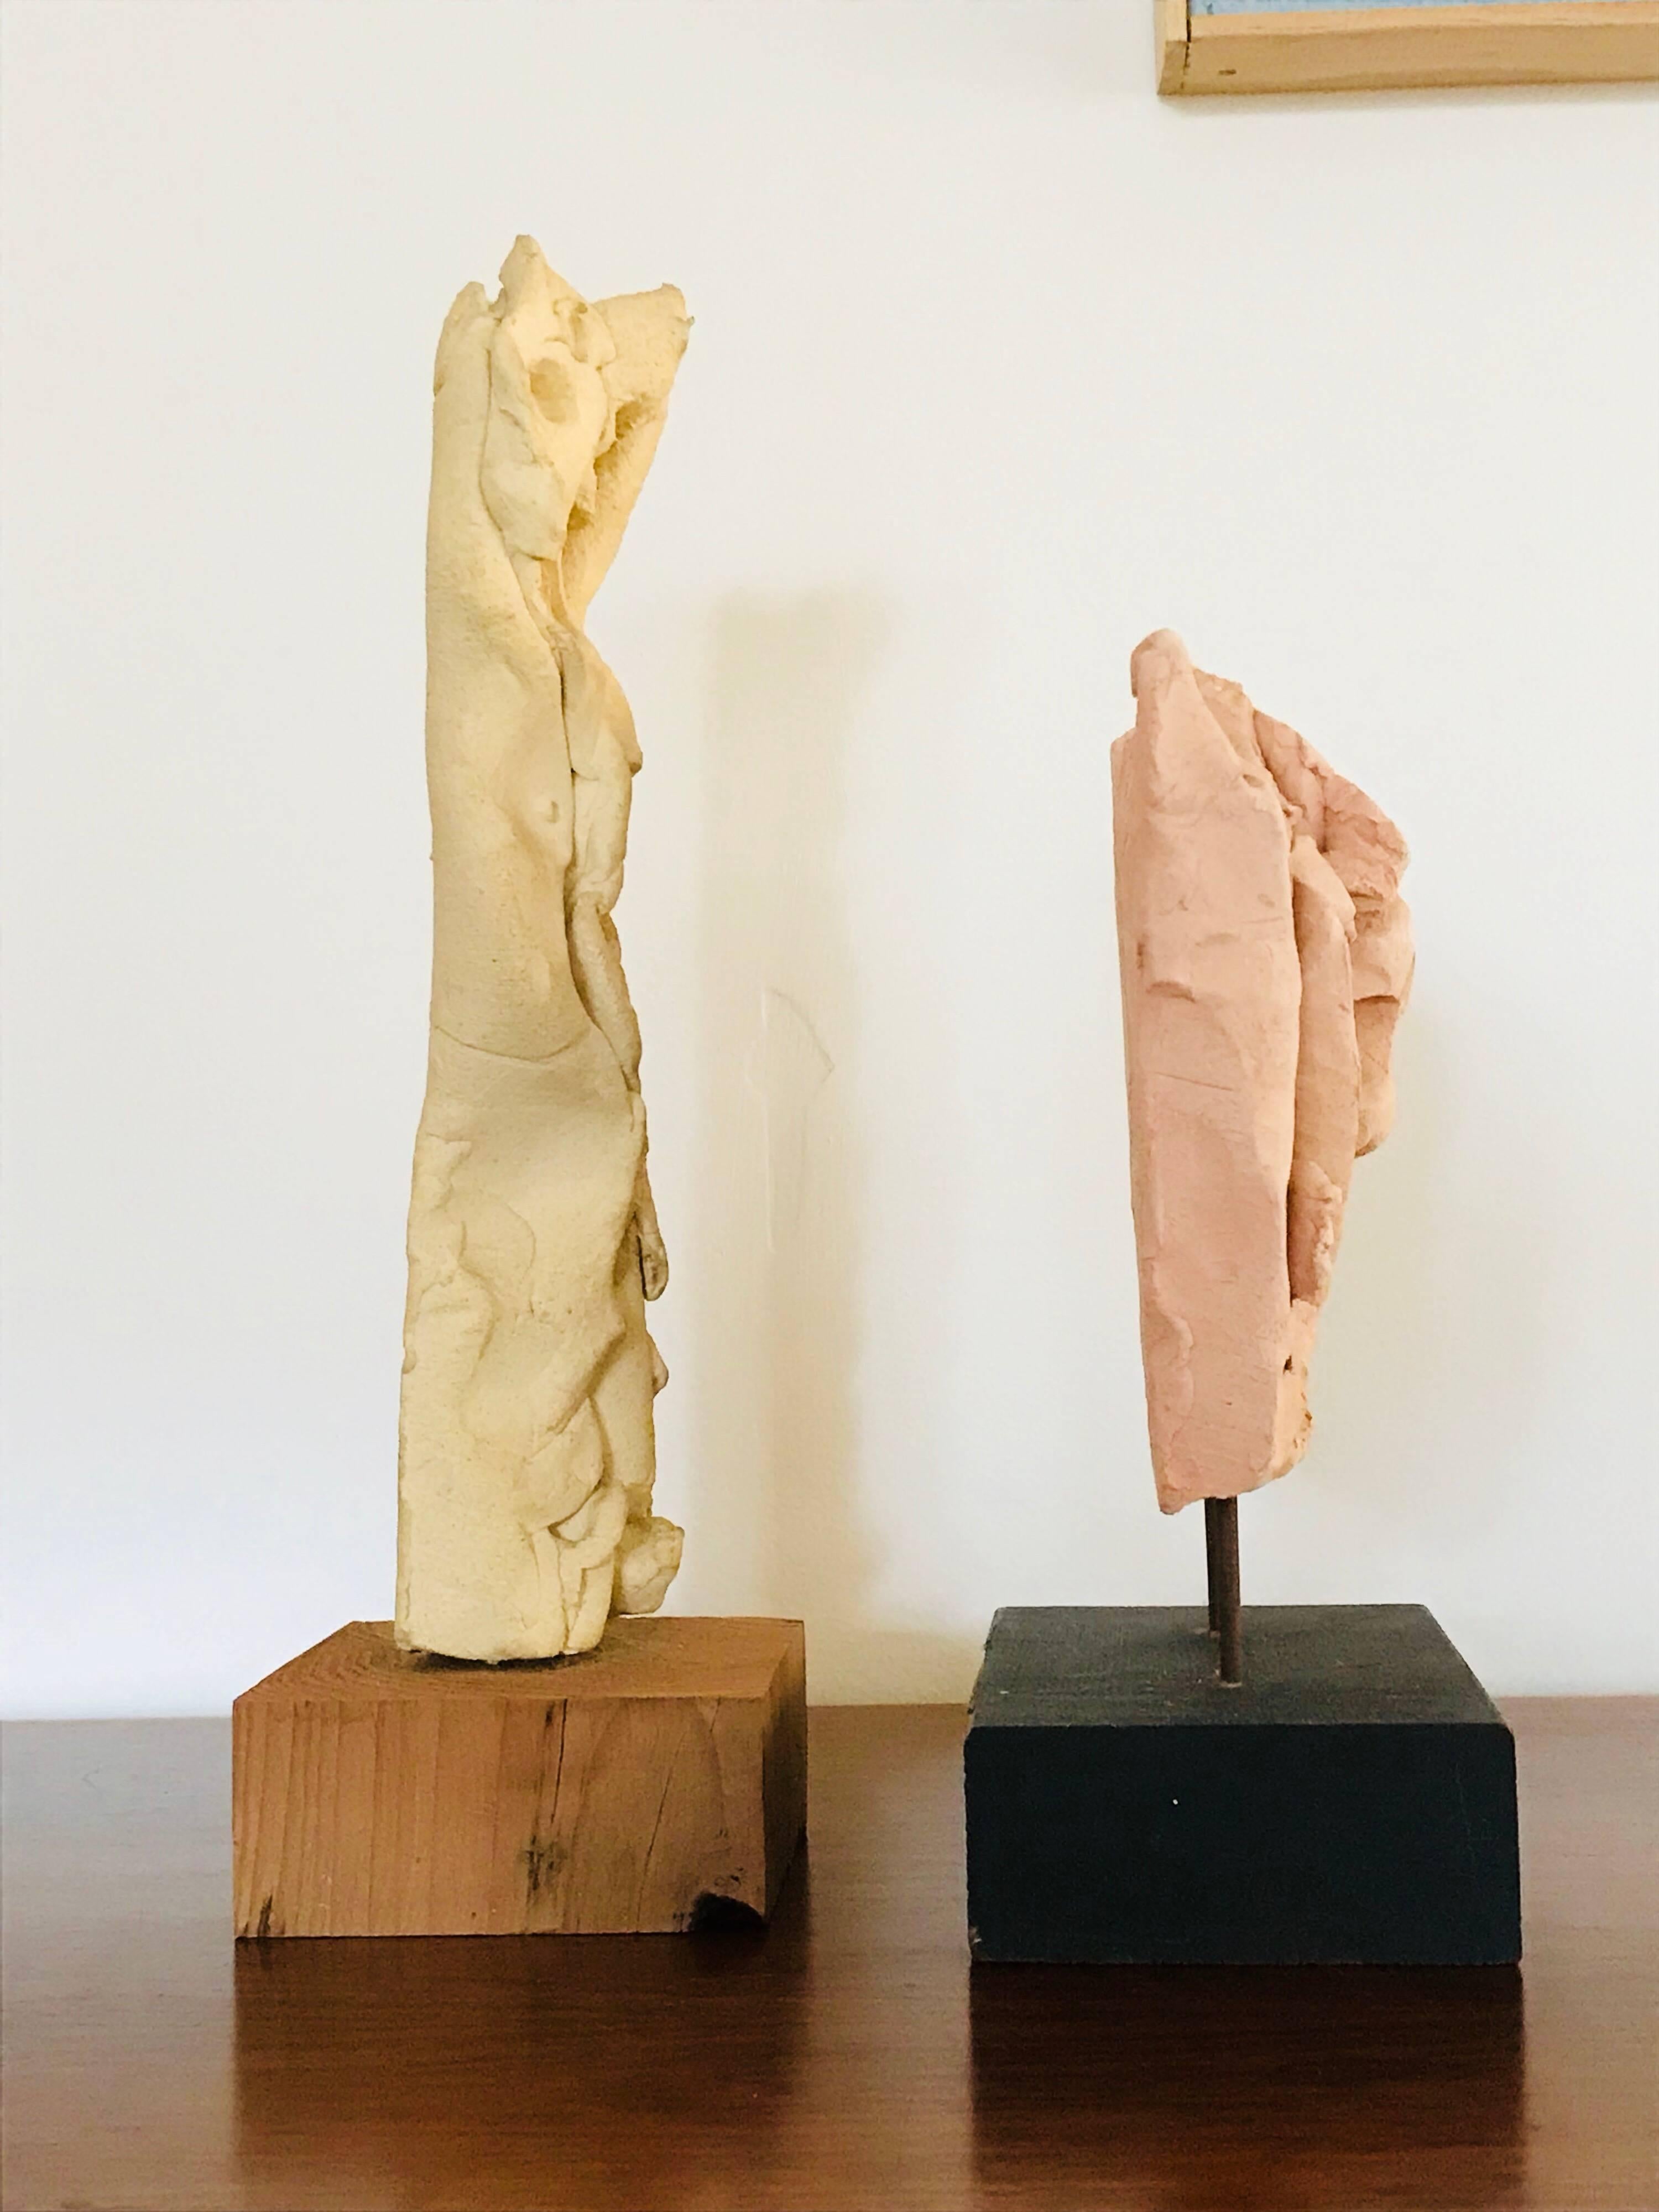 Hand-Crafted Emerson Woelffer Abstract Expressionist Ceramic Sculptures, 1979